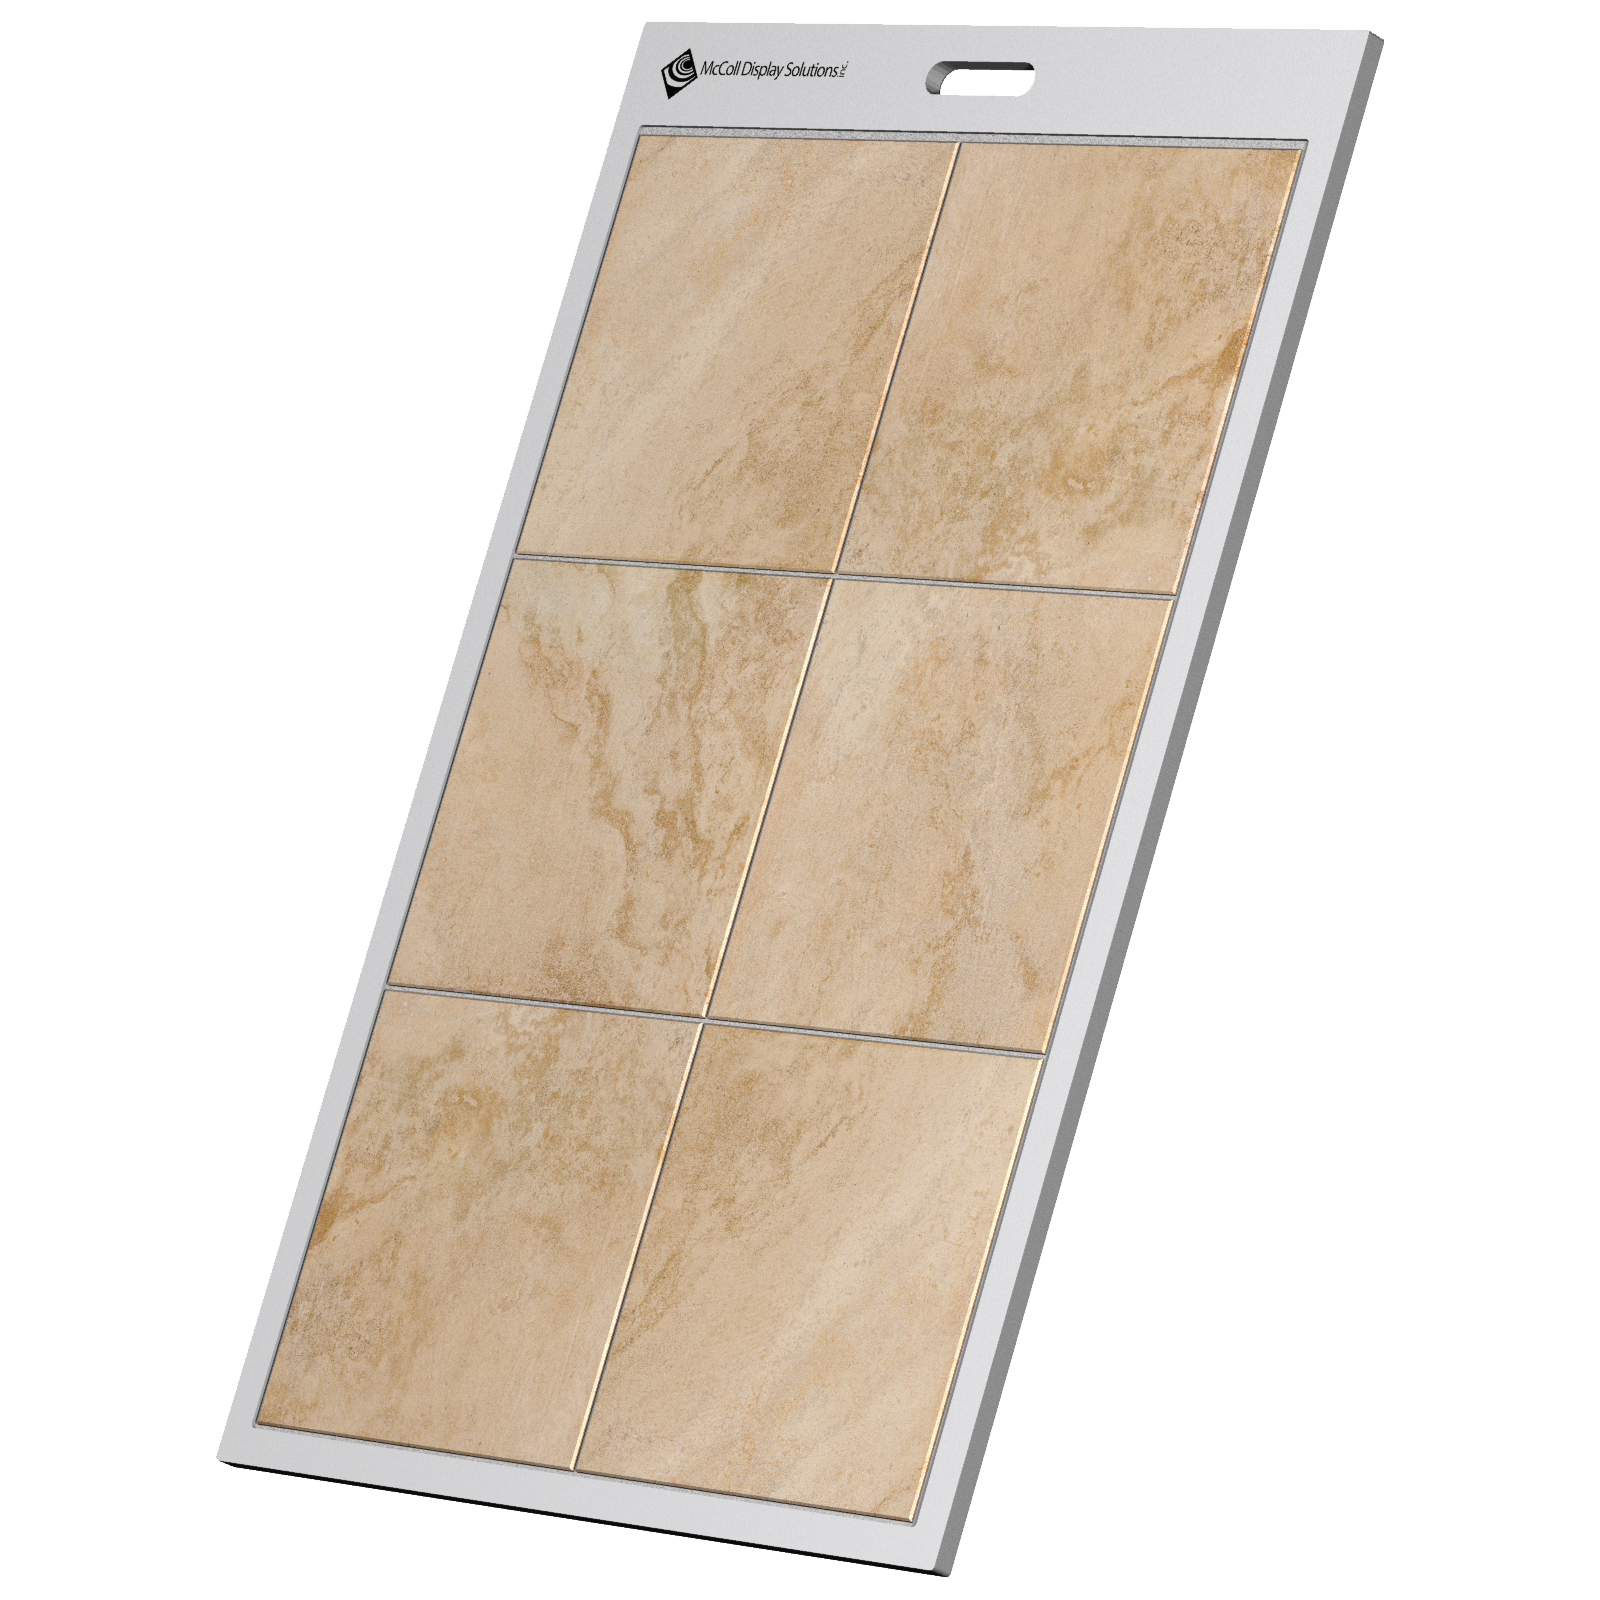 Custom Color Grouted Panel Display Board Shows Ceramic Tile Stone Marble Granite Installation with Grout for Portability of Flooring Showroom Displays